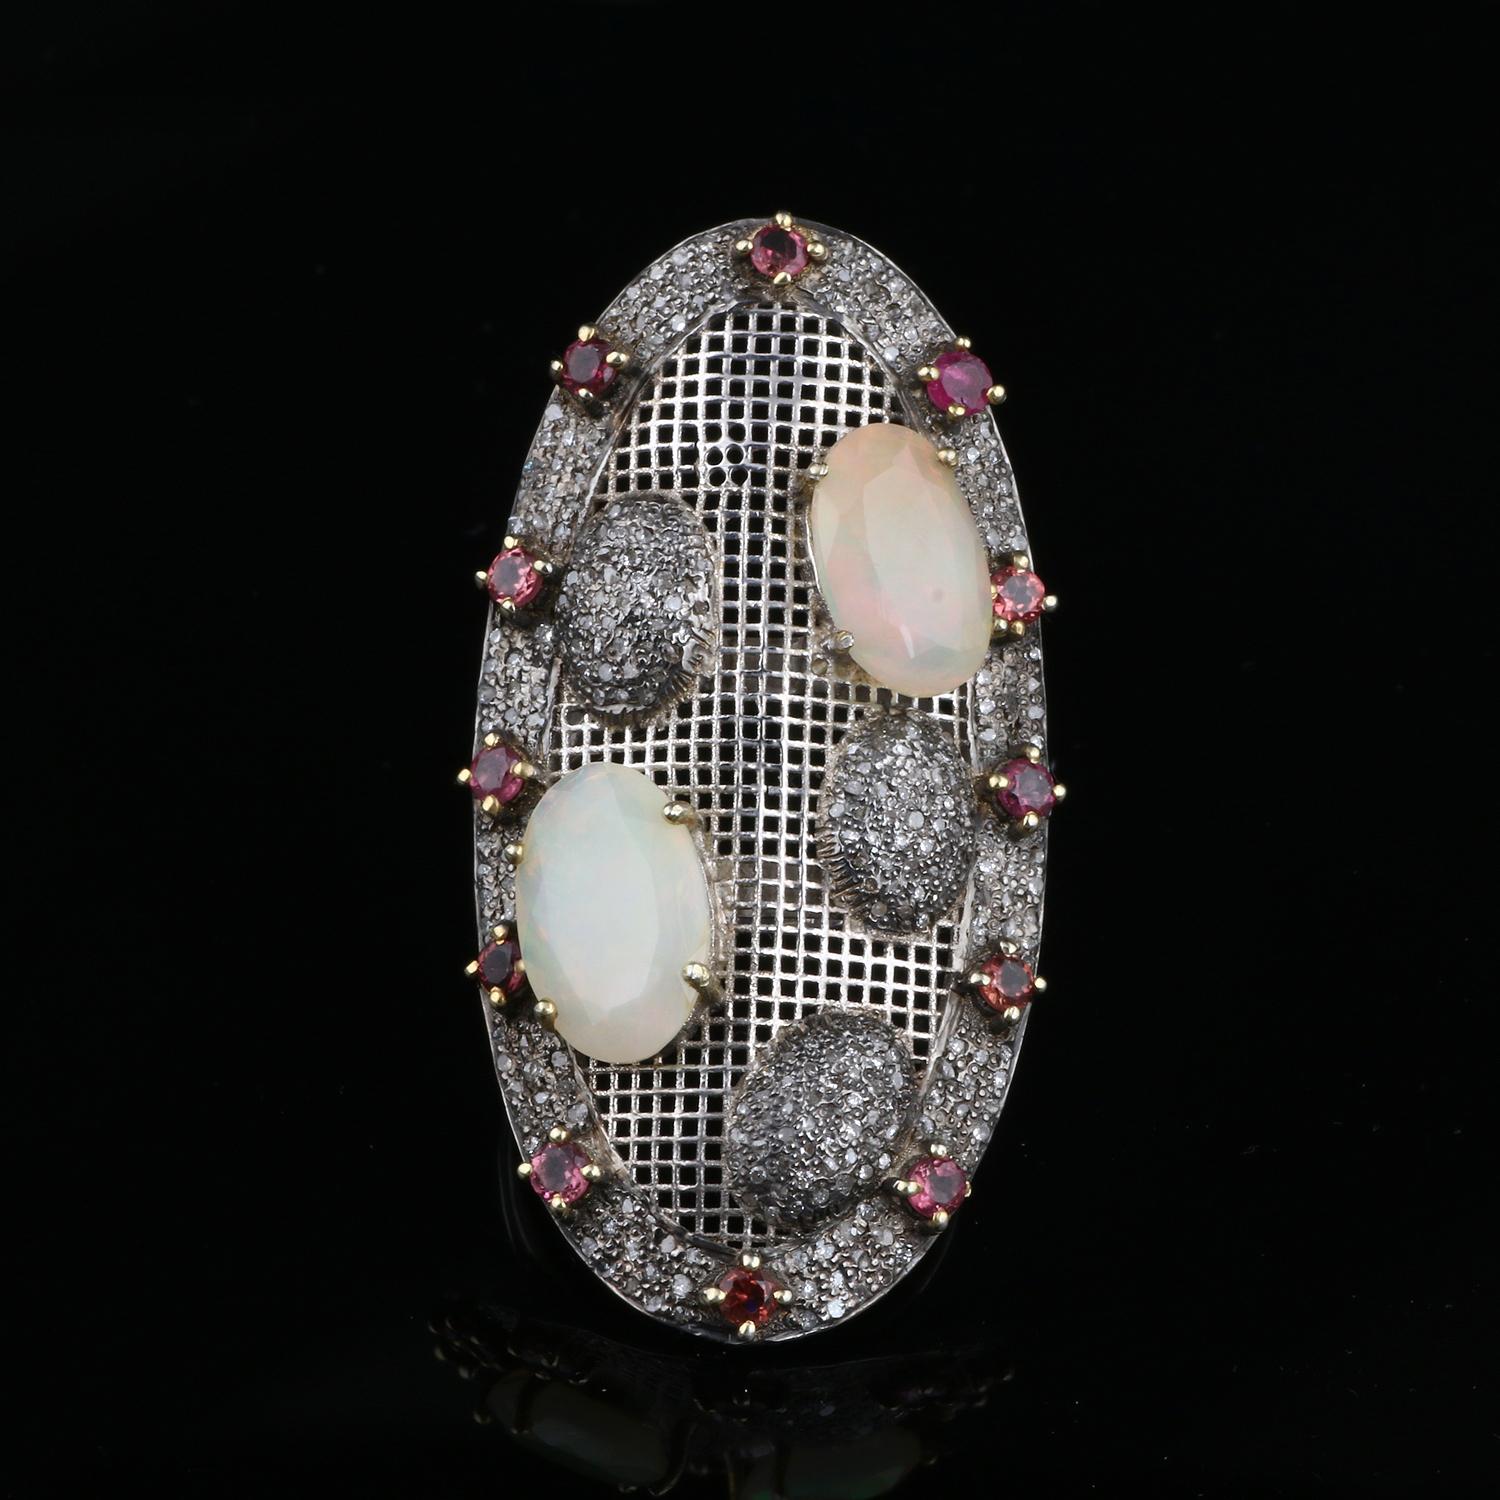 Item details:-

✦ SKU:- ESRG00206

✦ Material :- Silver
✦ Gemstone Specification:-
✧ Diamond
✧ Pink Tourmaline, Ethiopian Opal

✦ Approx. Diamond Weight : 0.95
✦ Approx. Silver Weight : 12.11
✦ Approx. Gross Weight : 13.35

Ring Size (US): 7.5

You